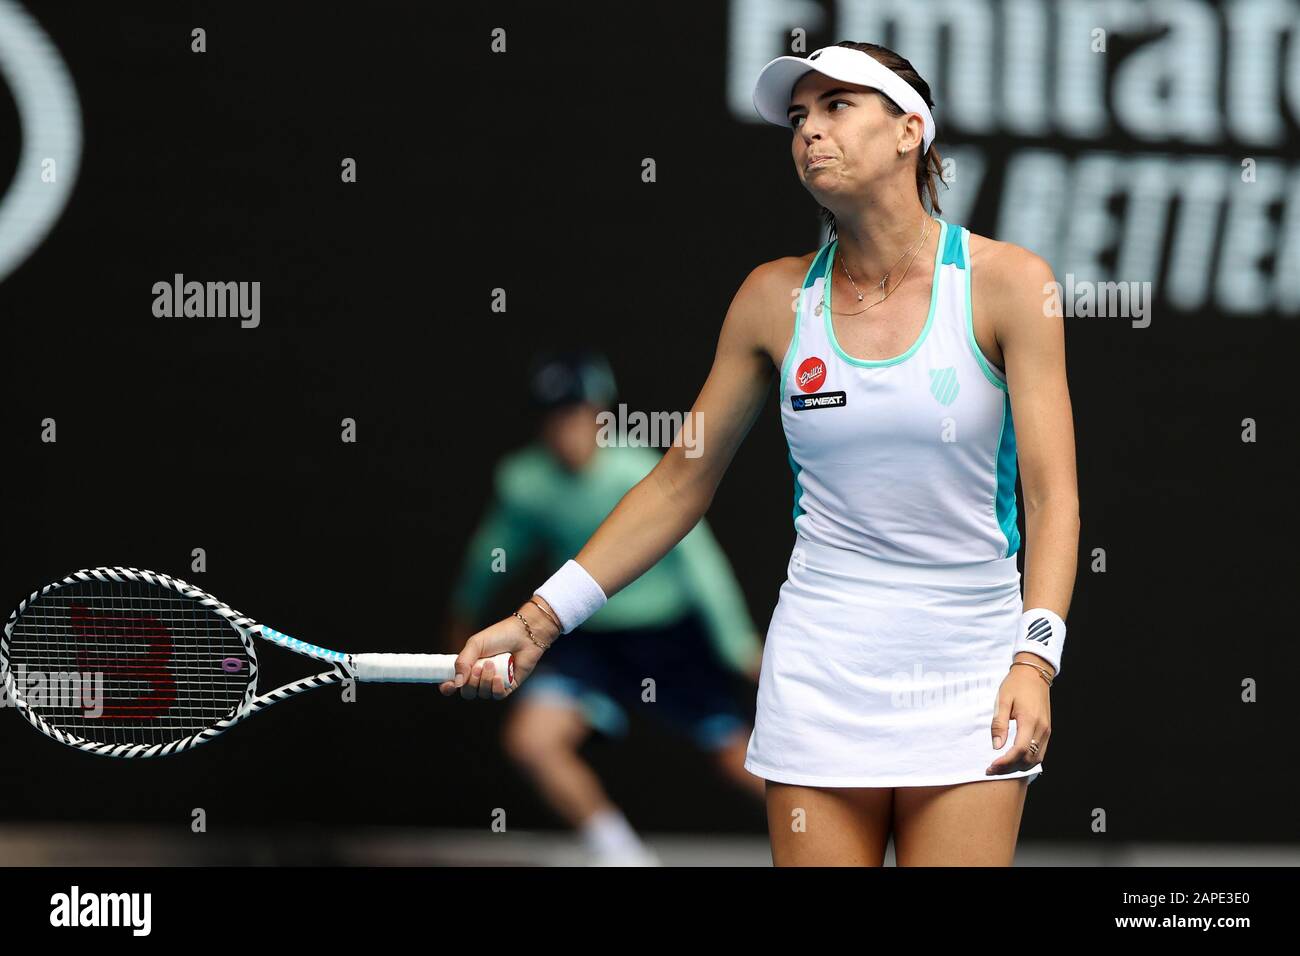 Melbourne, Australia. 23rd Jan, 2020. Ajla Tomljanovic of Australia during  the second round match at the ATP Australian Open 2020 at Melbourne Park,  Melbourne, Australia on 23 January 2020. Photo by Peter